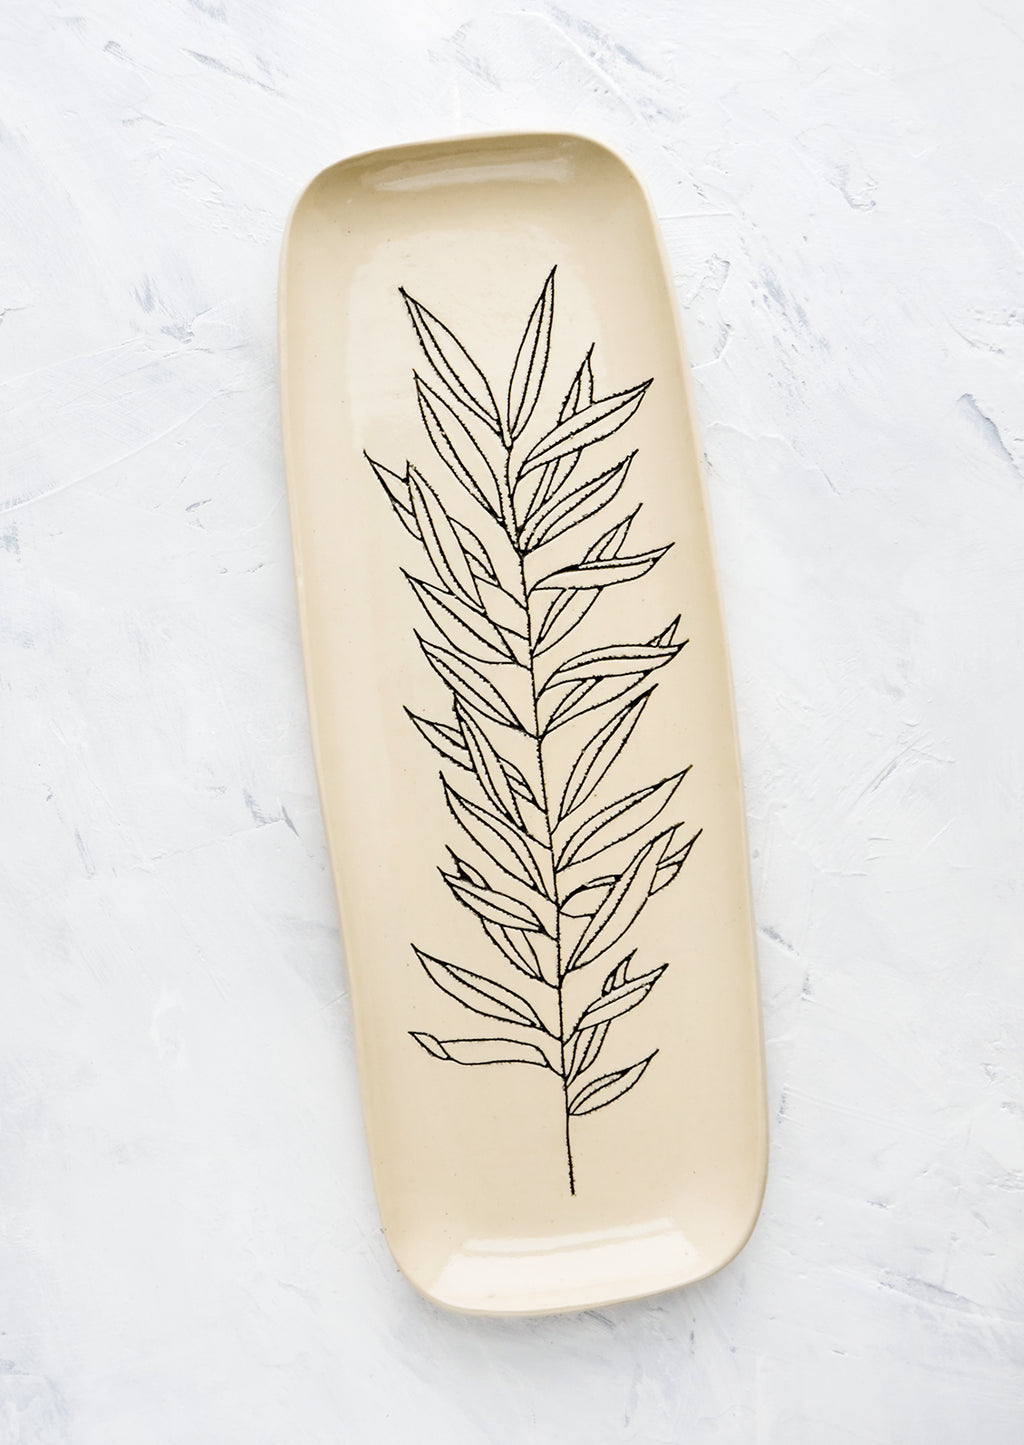 Willow: A long and skinny ceramic tray in natural bisque color with an etched black drawing of a Willow plant.